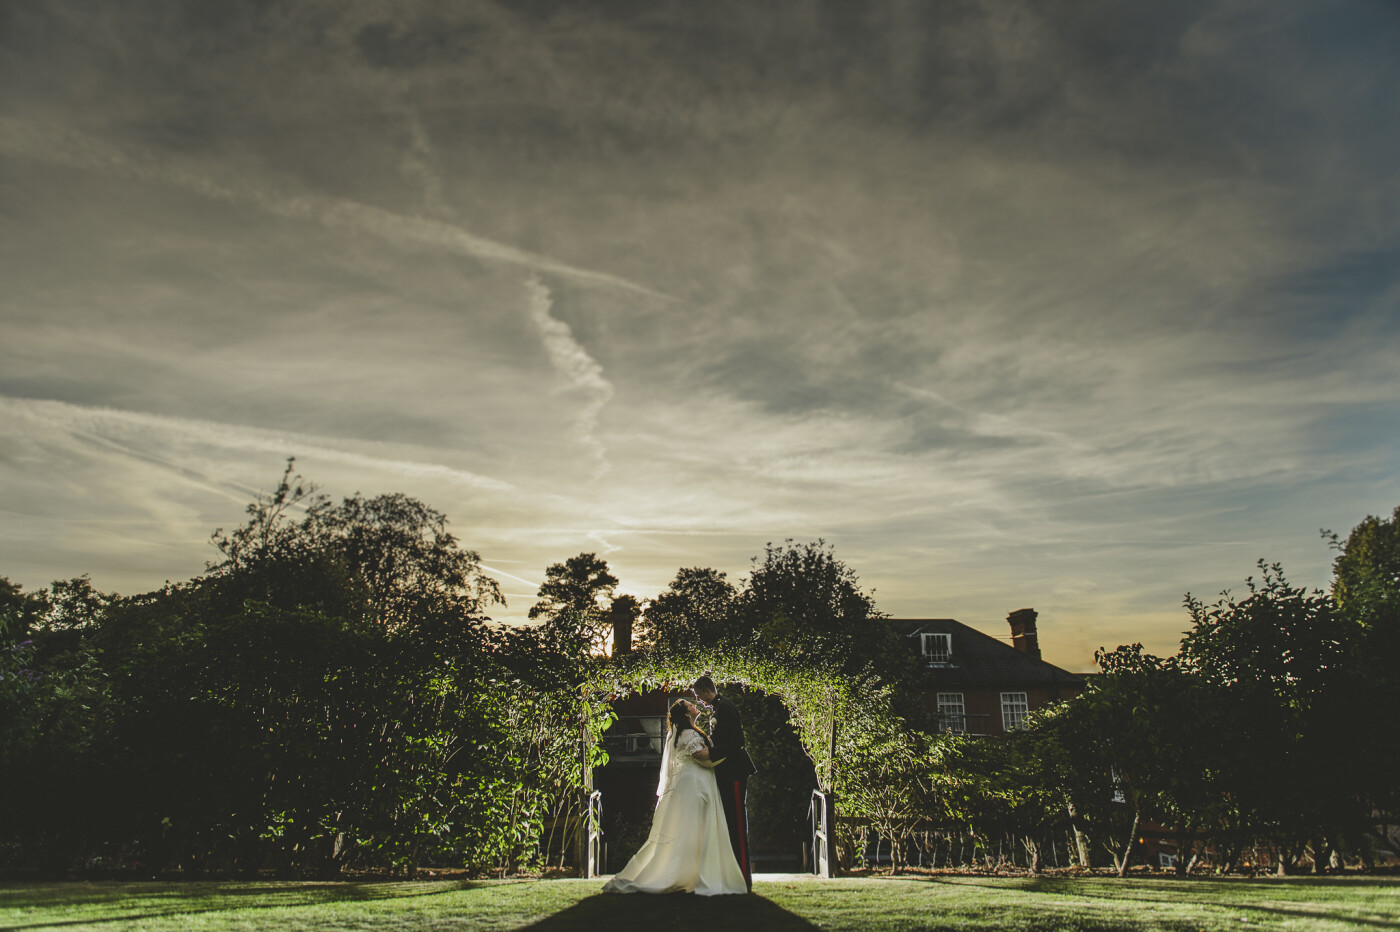 At  recent wedding at Brandhatch Hotel, we managed to sneak the bride & groom out at sunset, set a light up behind the couple and tried to balance the sunset above the building, trees with the flash light. With the aim to produce a stunning WOW shot for the couple. Hopefully we pulled it off.